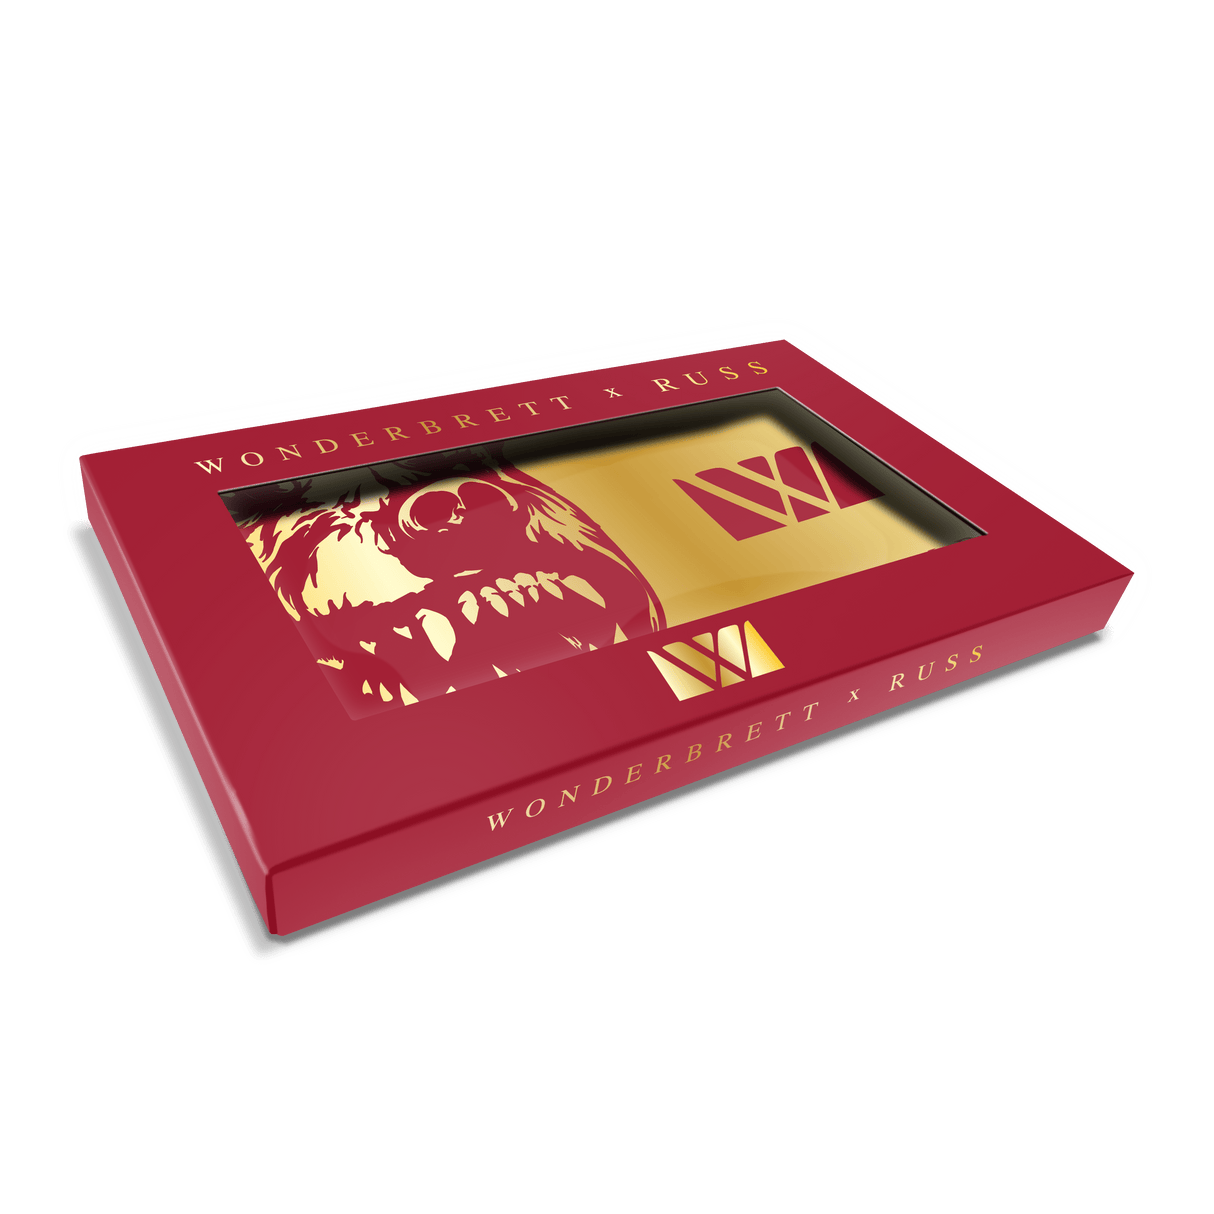 Wonderbrett x Russ Collab medium-sized glass rollin' tray with gold and red design